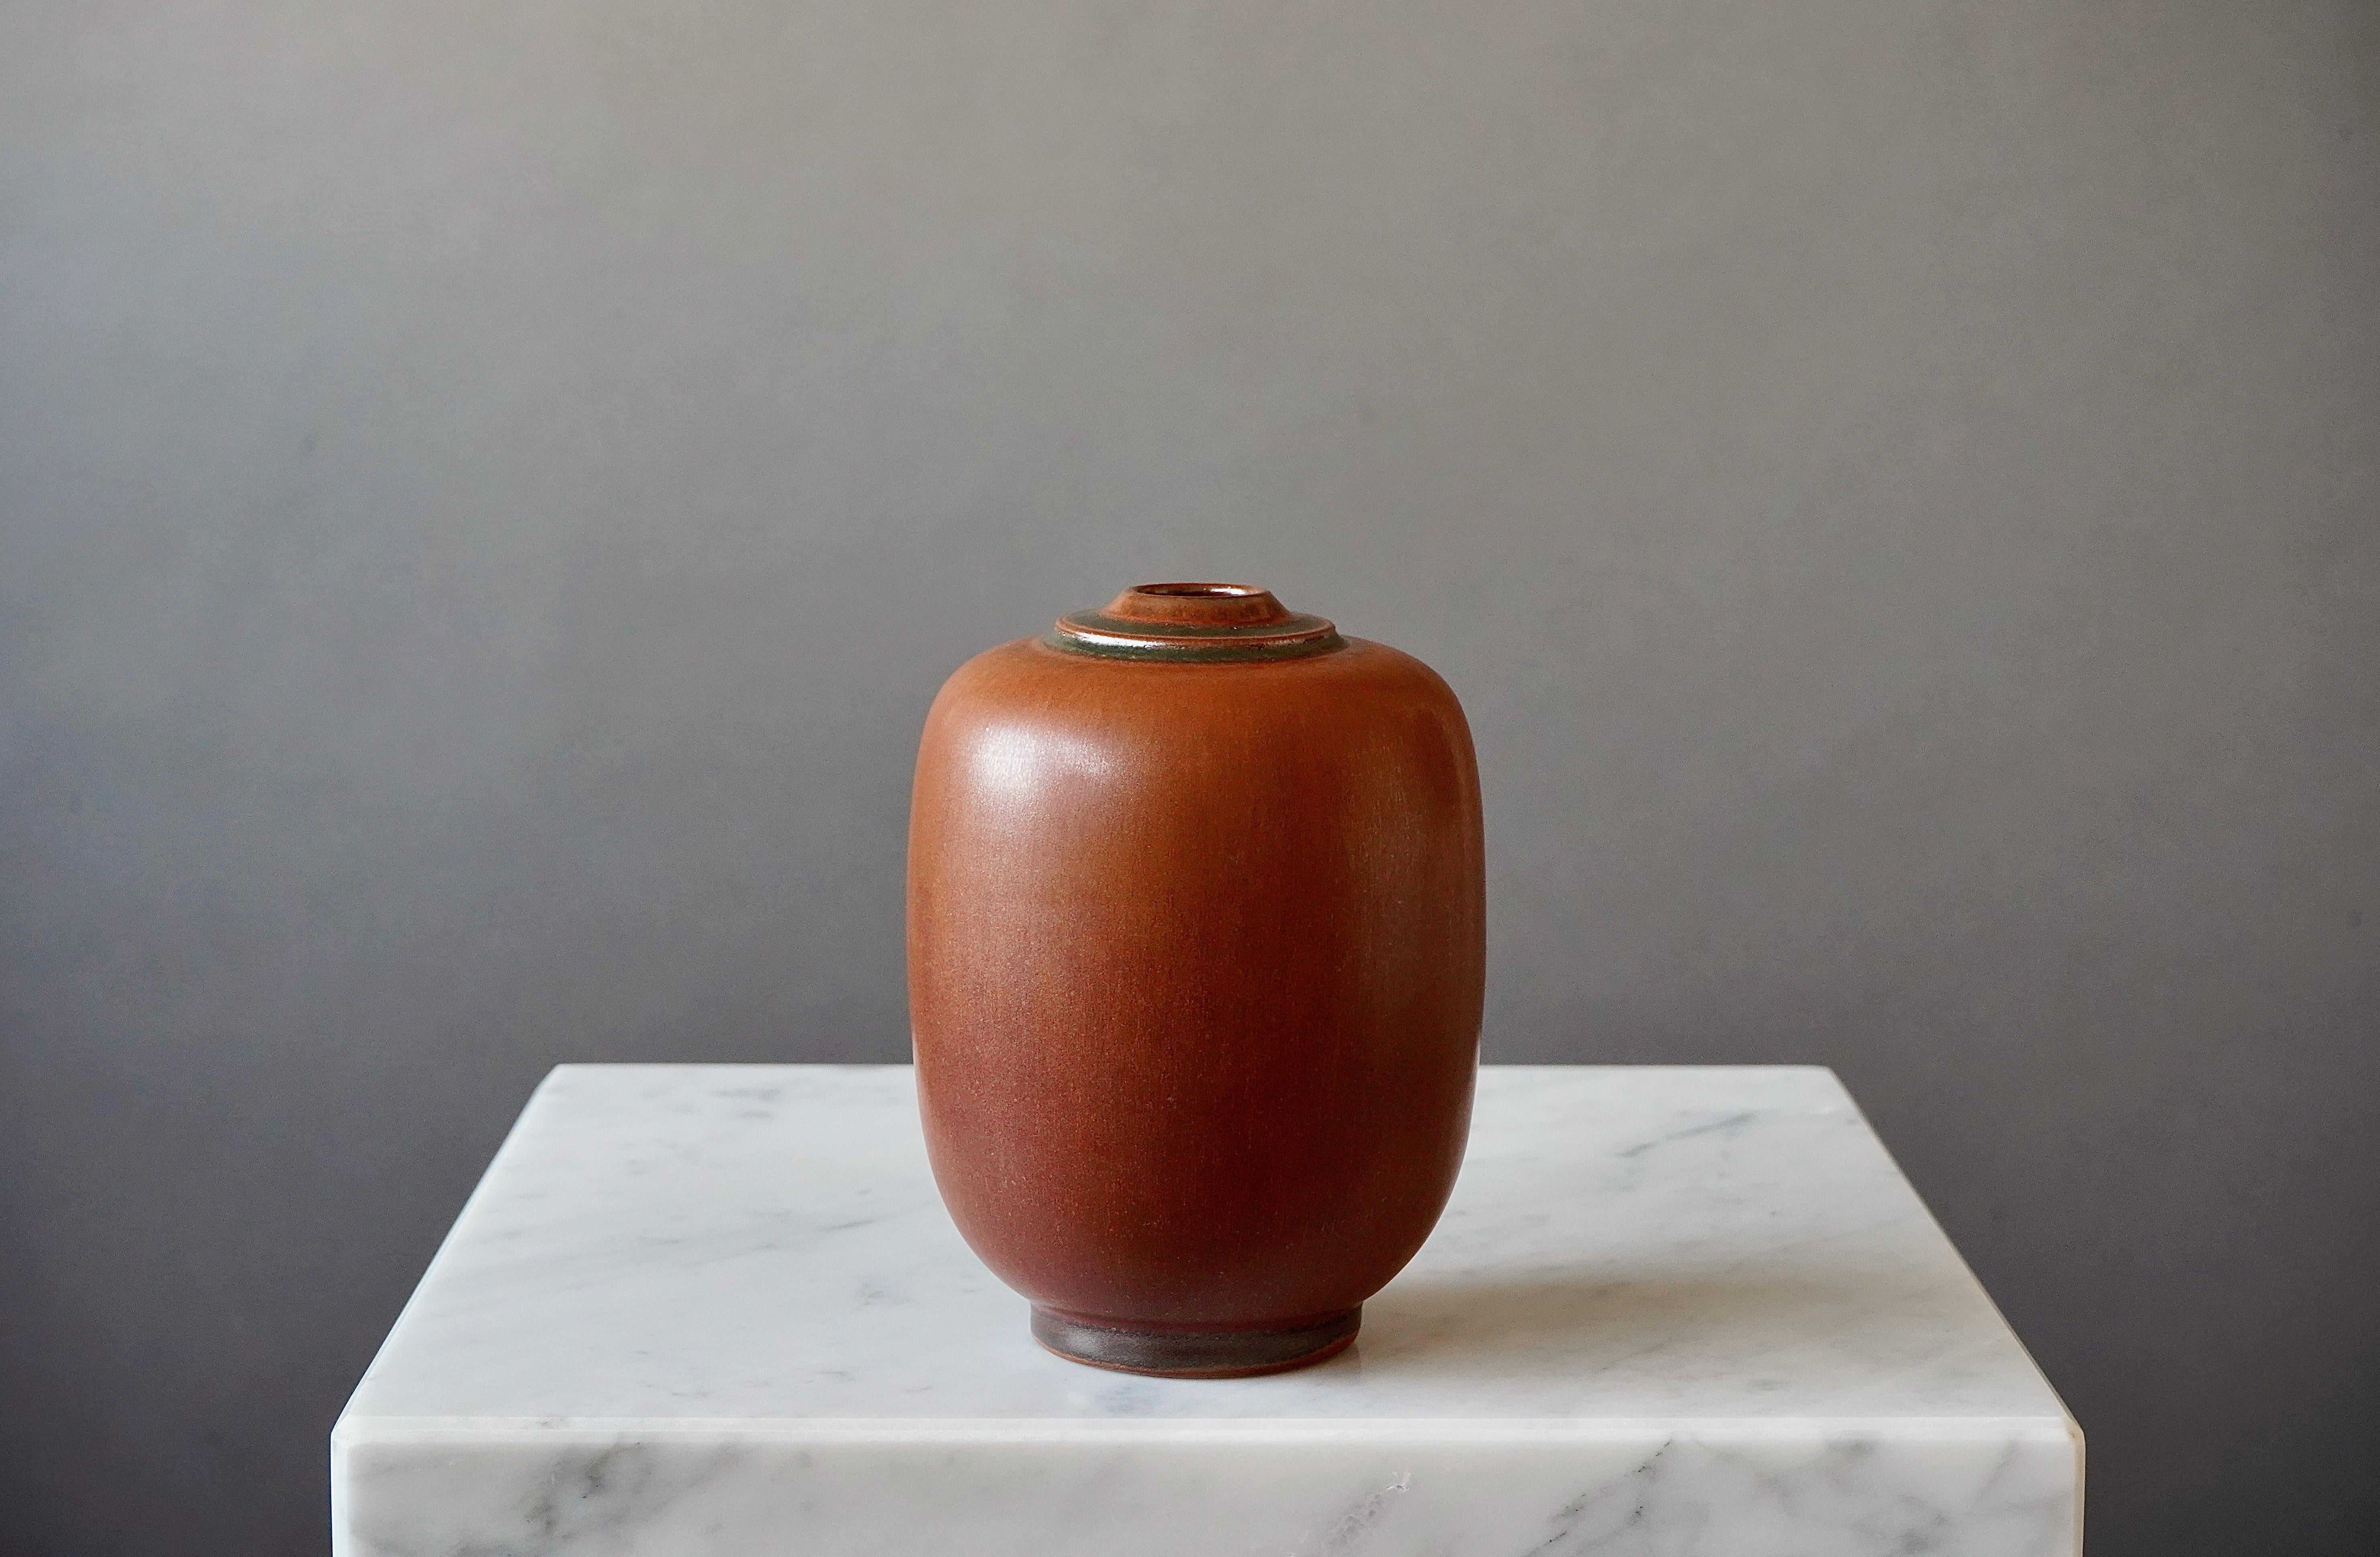 Beautiful stoneware vase made by master ceramists Erich and Ingrid Triller.
This piece was created at their workshop in Tobo, Sweden, 1950s.

Excellent condition. Signed on the base with their customary 